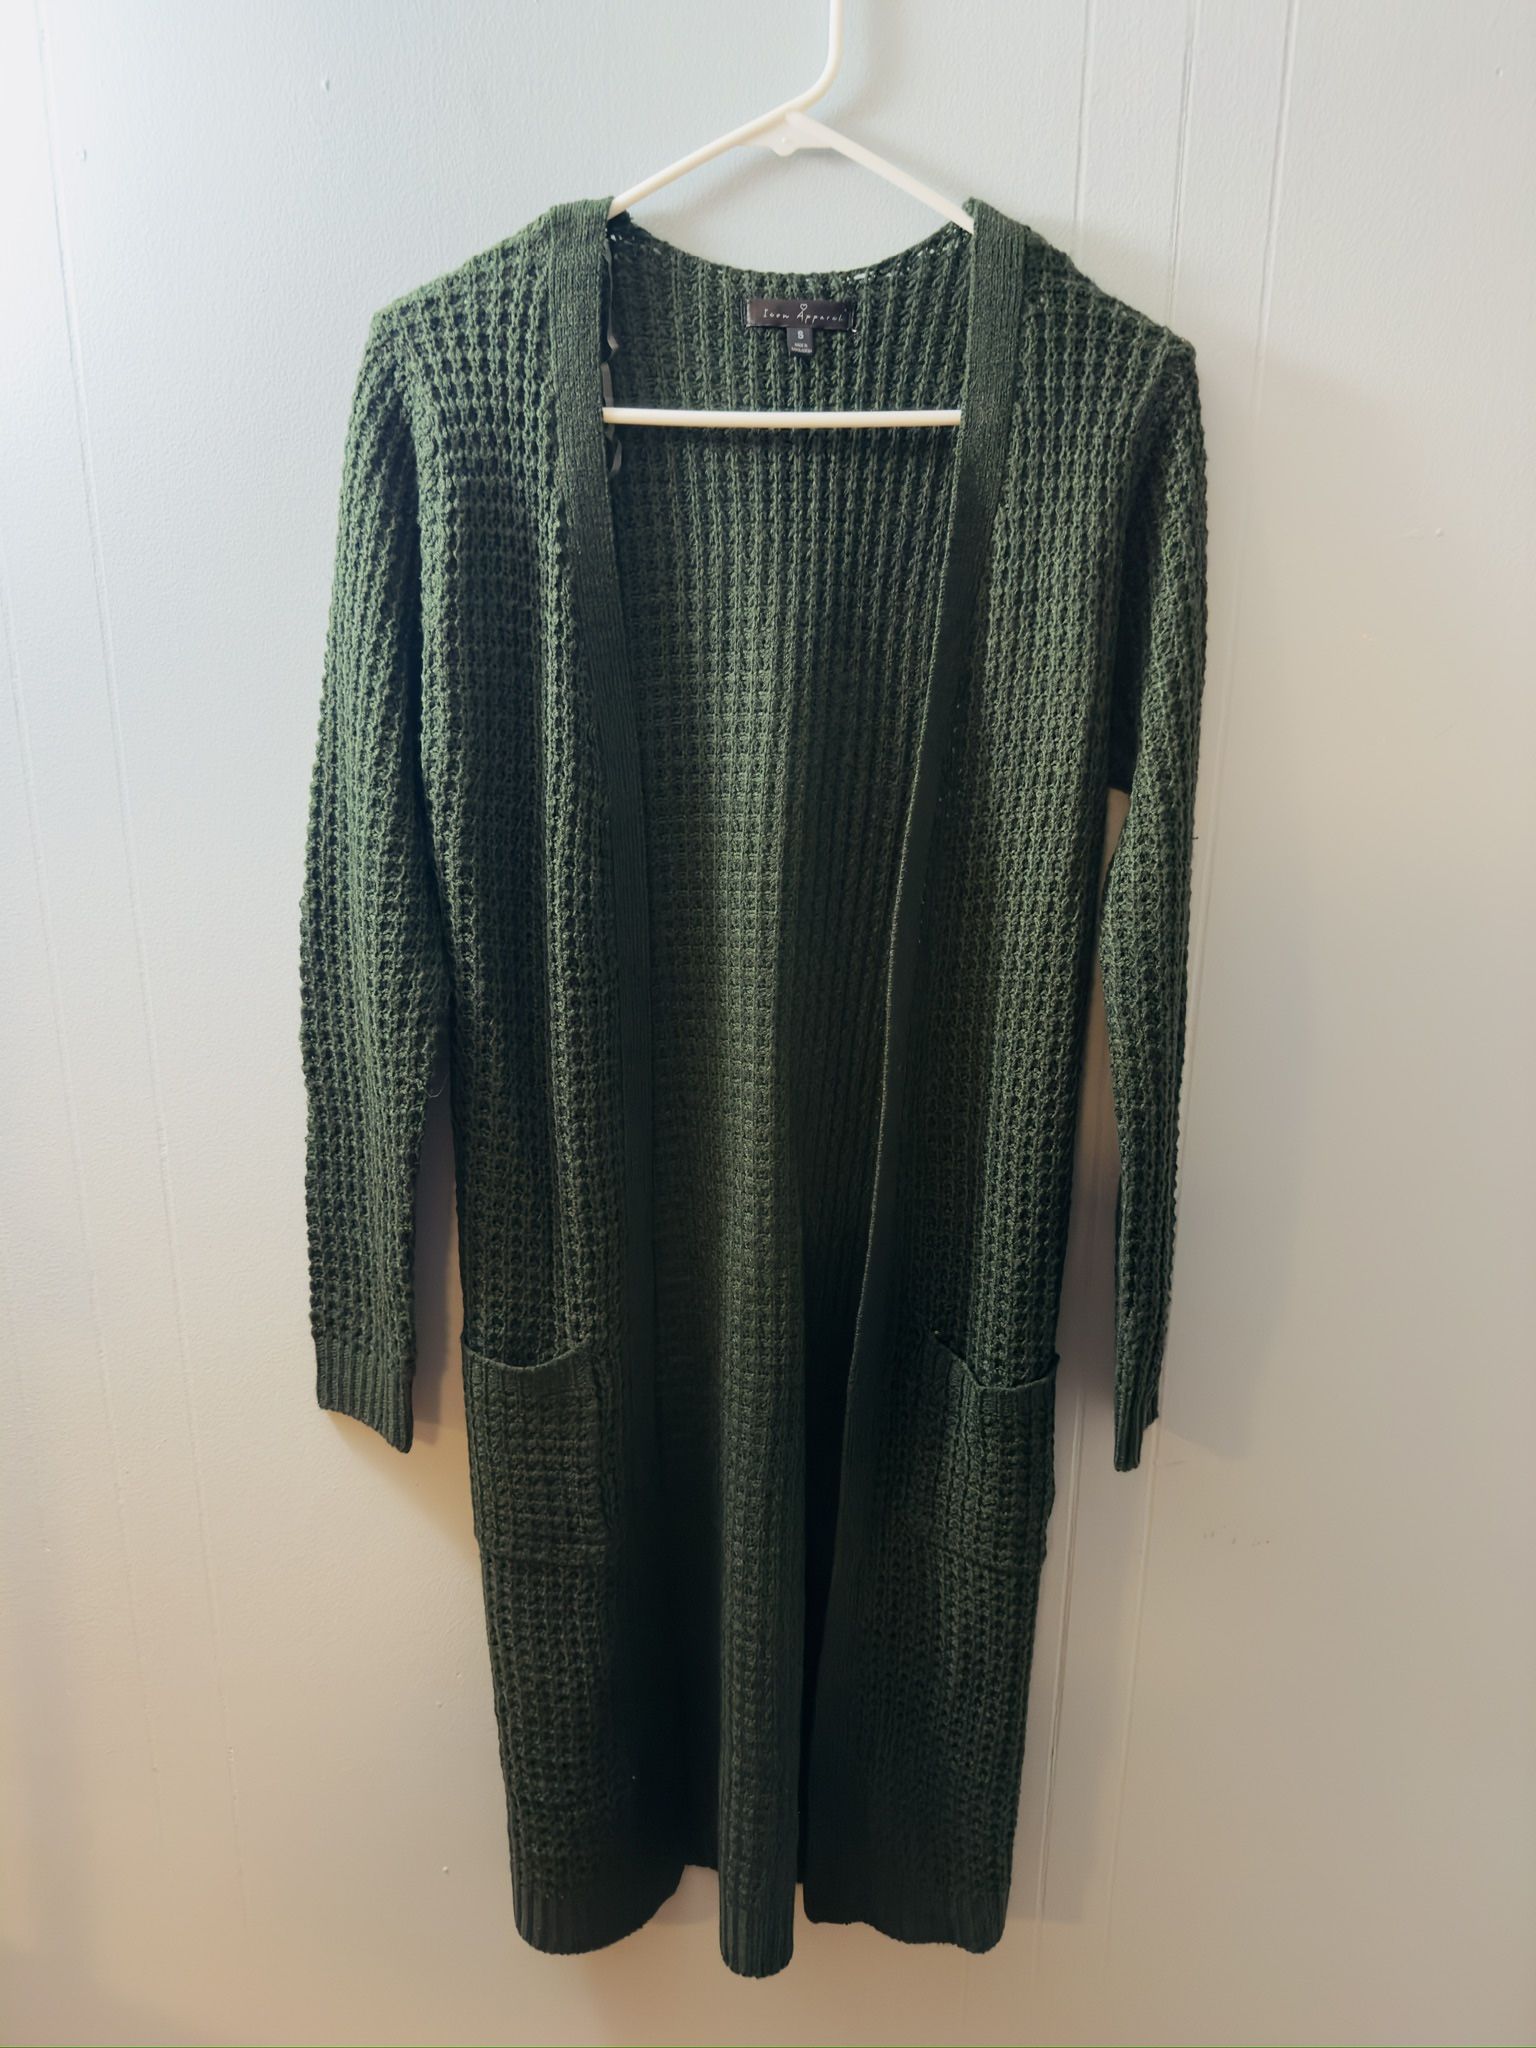 Icon Apparel Loose Knit Cardigan Sweater. Size Small. Green.